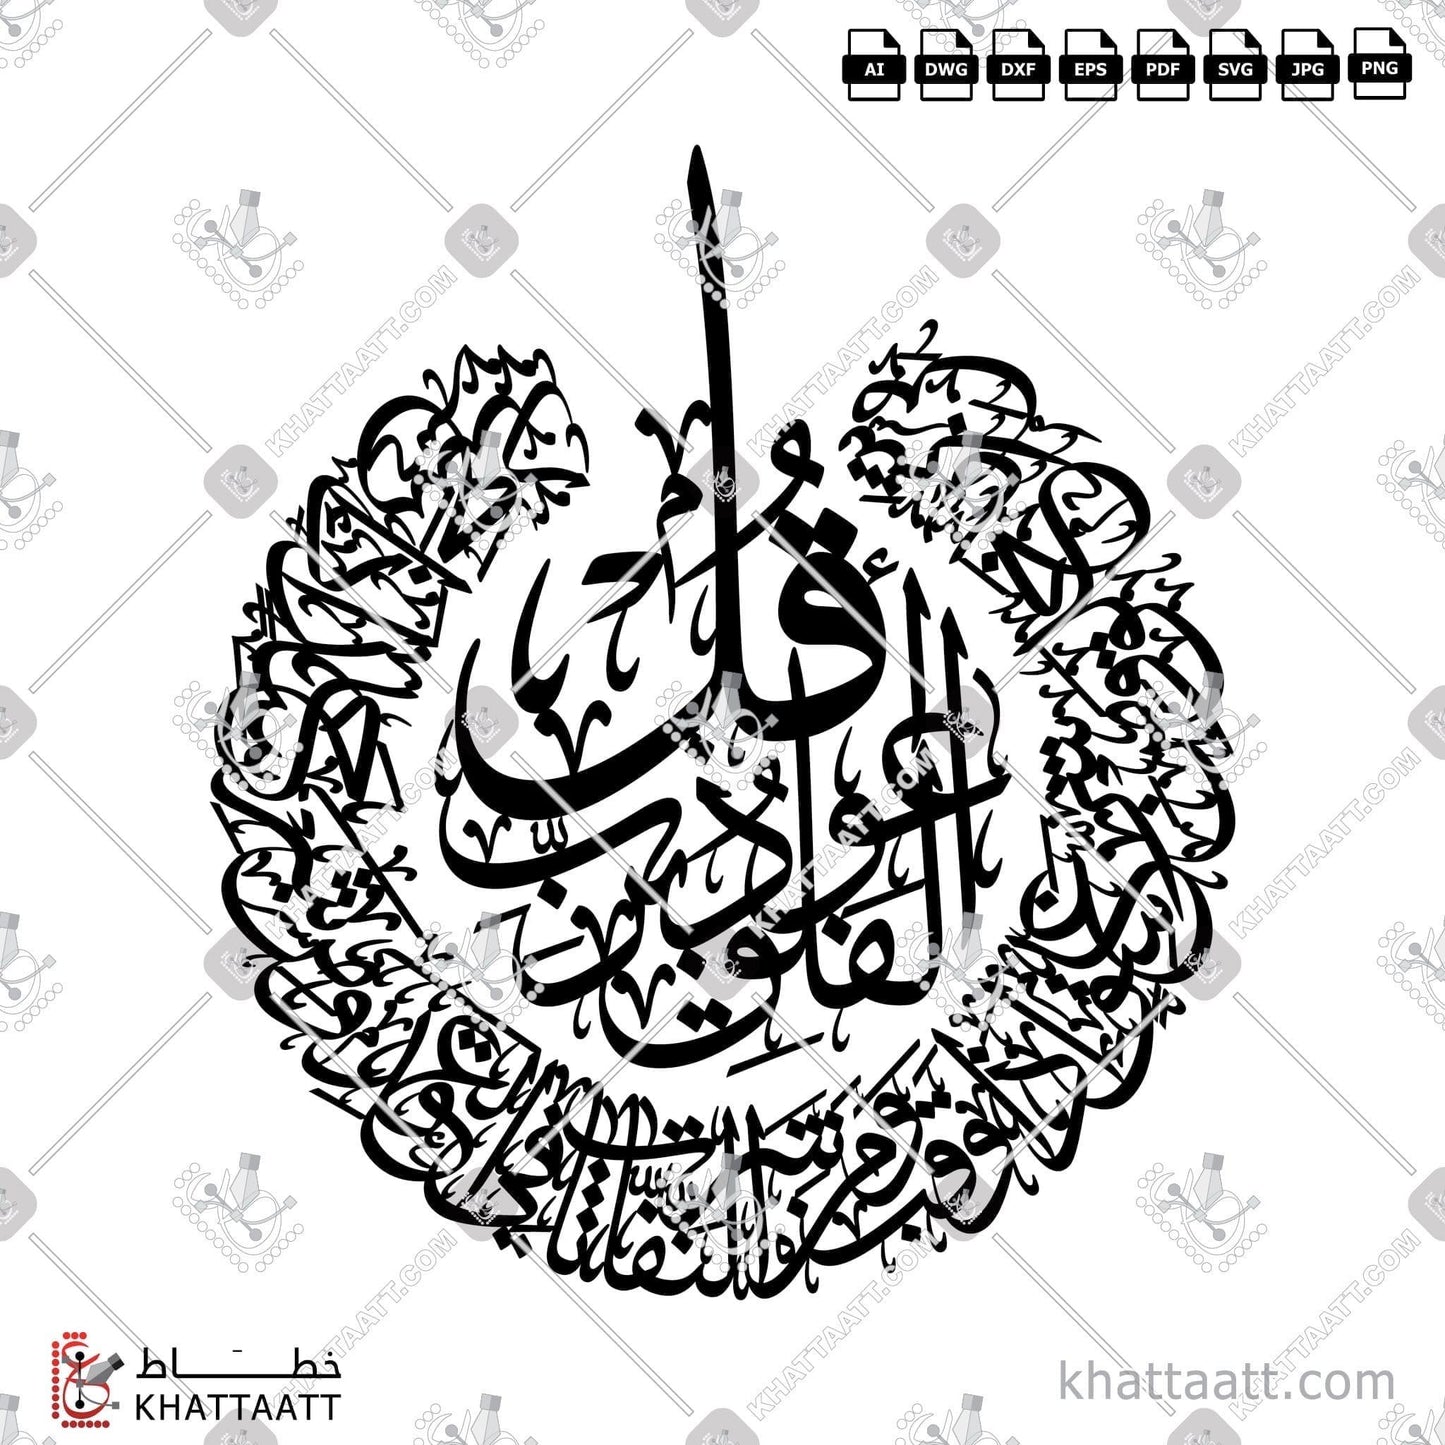 Download Arabic Calligraphy of Surat Al-Falaq - سورة الفلق in Thuluth - خط الثلث in vector and .png